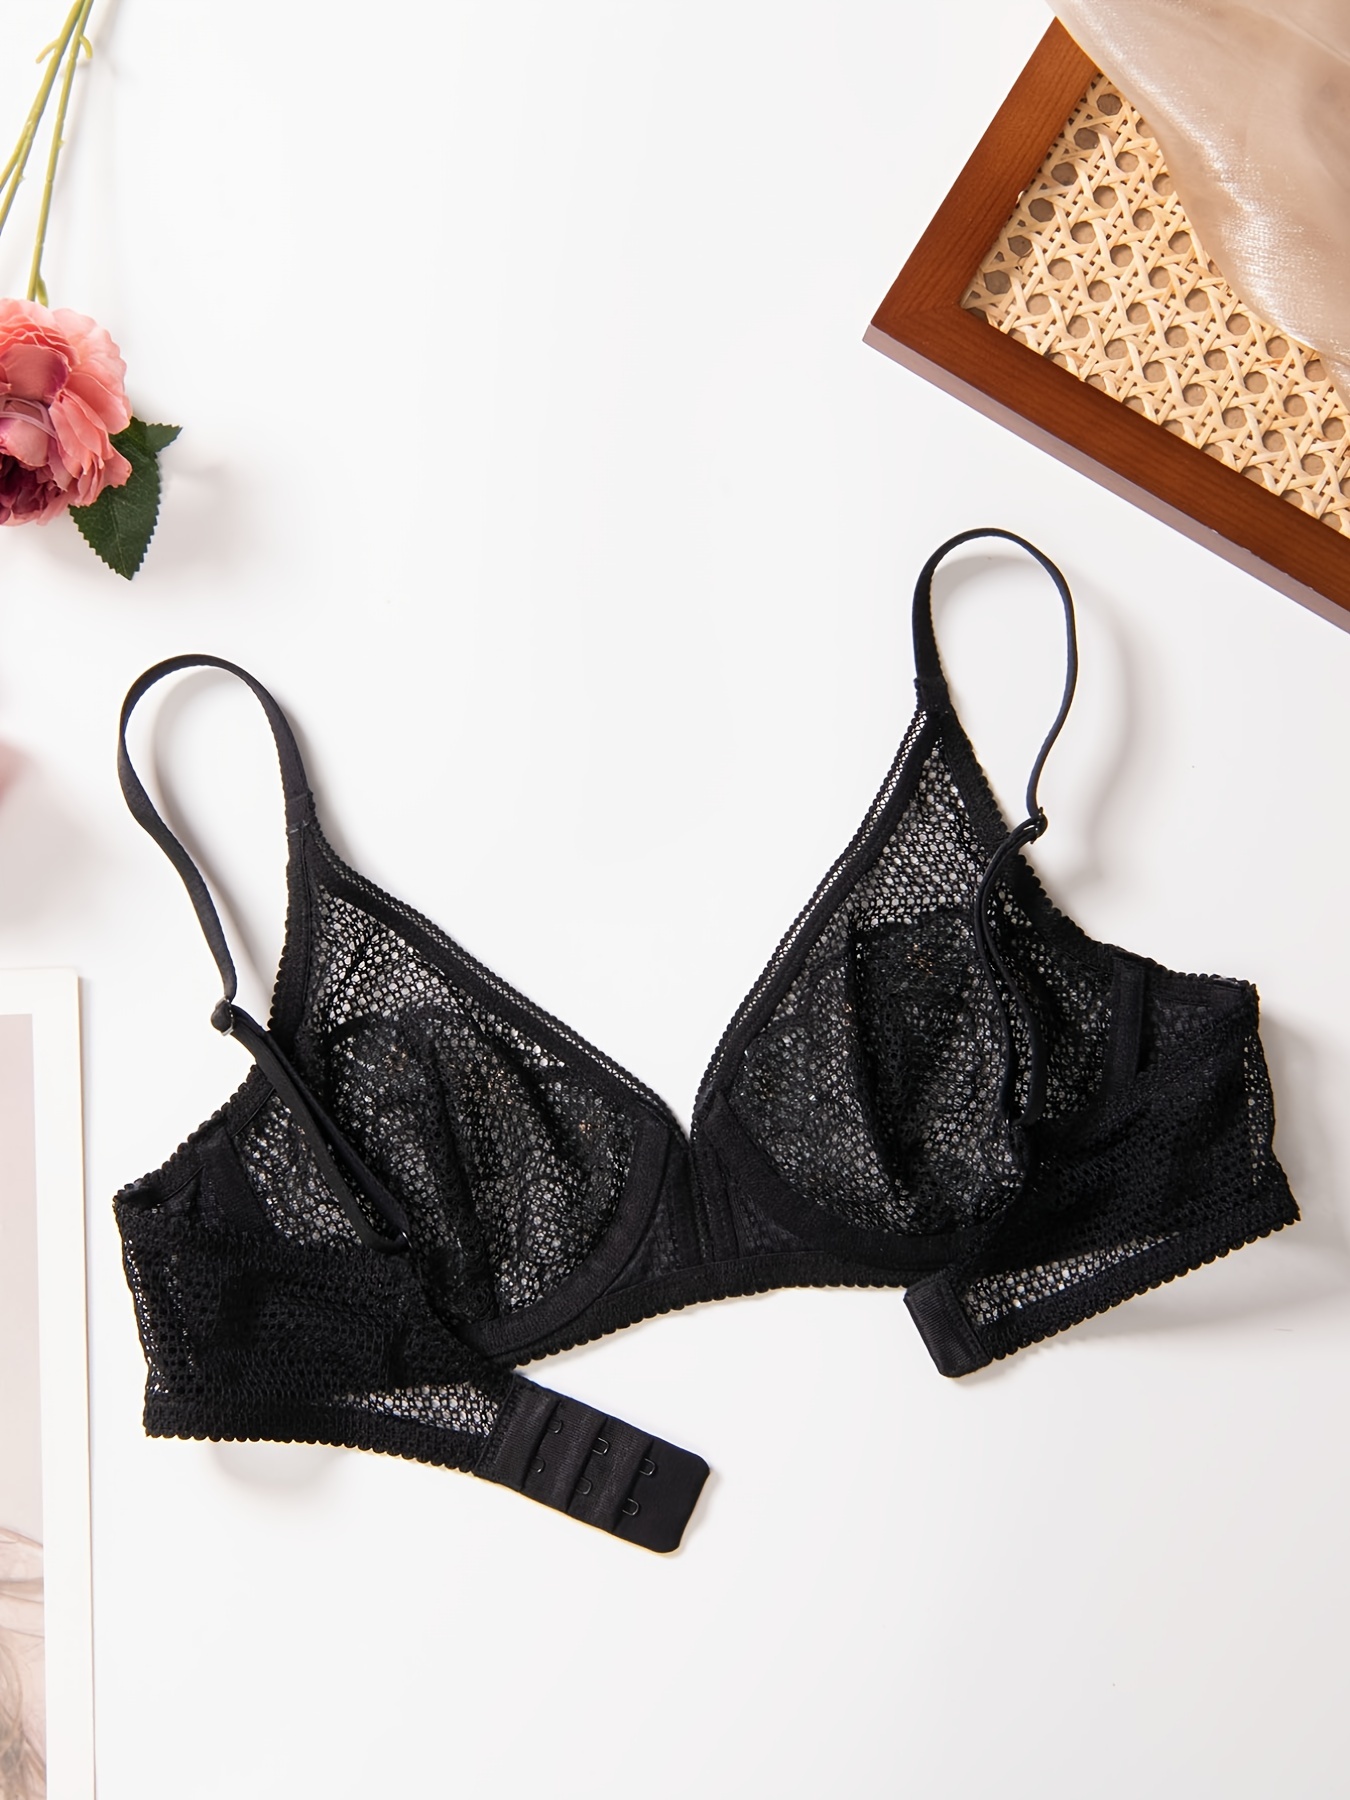 Lingerie for Valentine's Day: Find Lingerie That Makes a Great